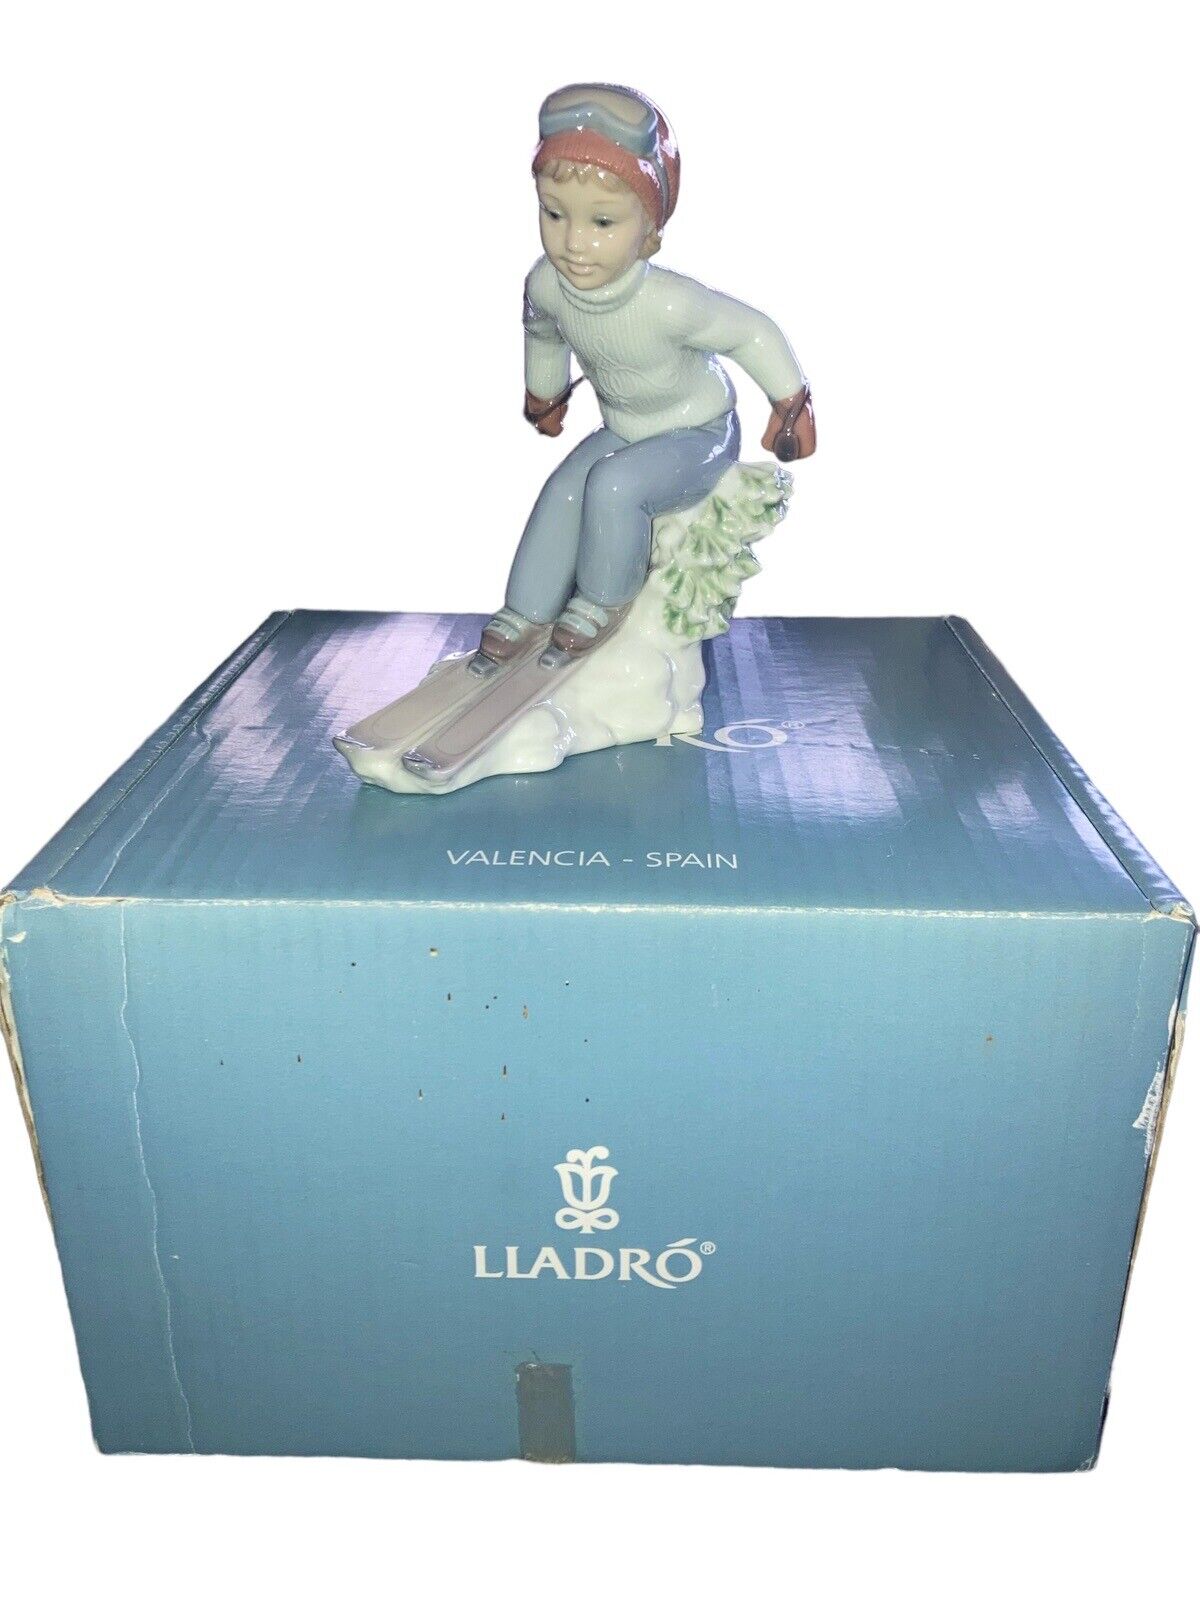 Lladro “I’ll Get There First” Retired 1990s Porcelain Figurine With Box 1008325